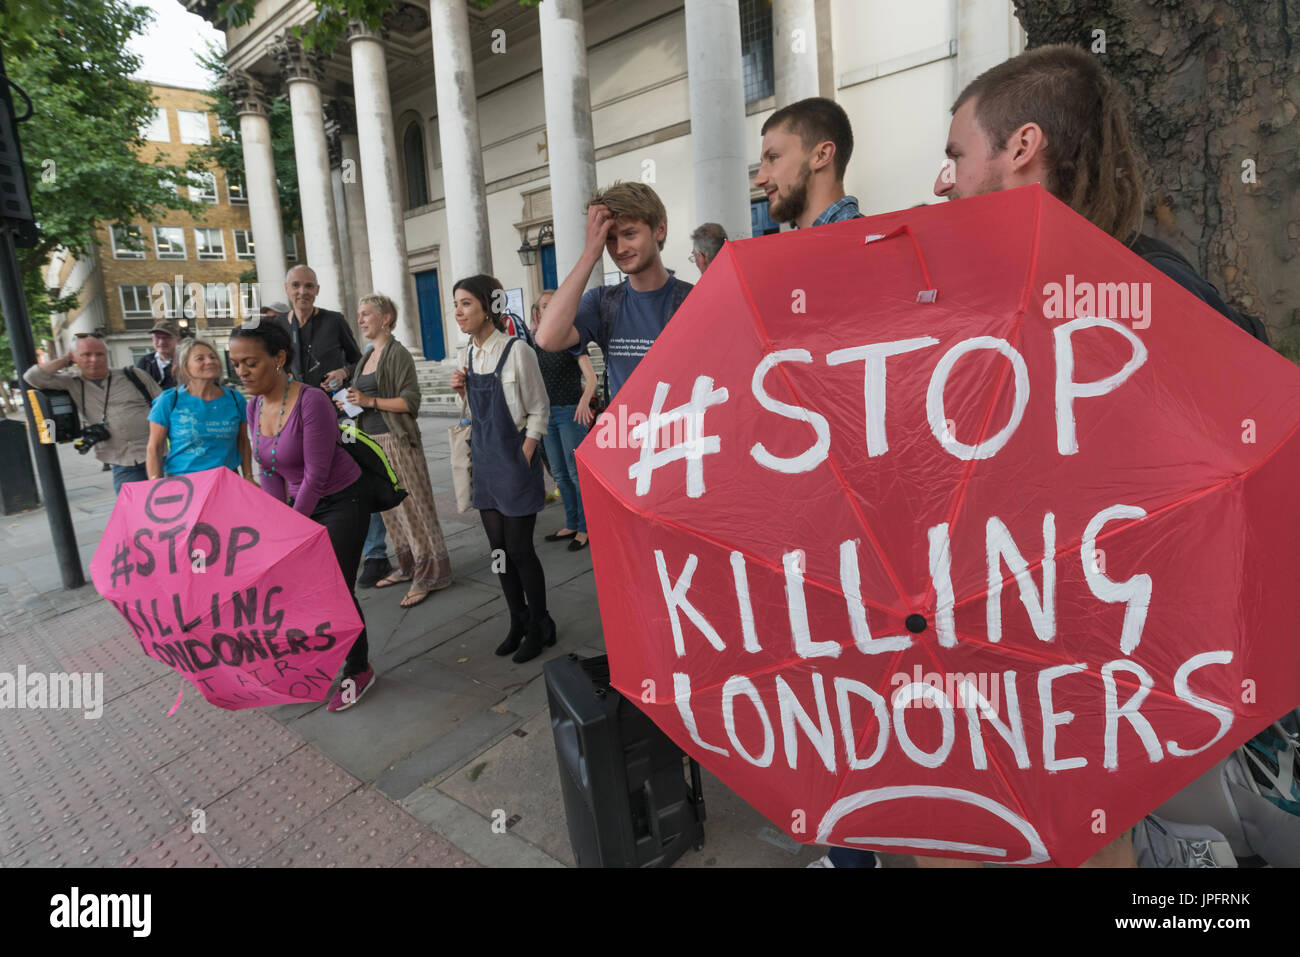 London, UK. 1st August 2017. Rising Up environmental protesters relax on the pavement at the end of their protest on the busy Marylebone Road, still holding umbrellas with the message 'Stop Killing Londoners'. They had carried out two brief  'Staying Alive' road-block disco protests to raise awareness and call for urgent action over the high pollution levels from traffic on London streets which cause 10,000 premature deaths each year. They sat down  in front of a banner 'Stop Killing Londoners Cut Air Pollution' while a statement was read explaining why they were protesting and that it would  Stock Photo